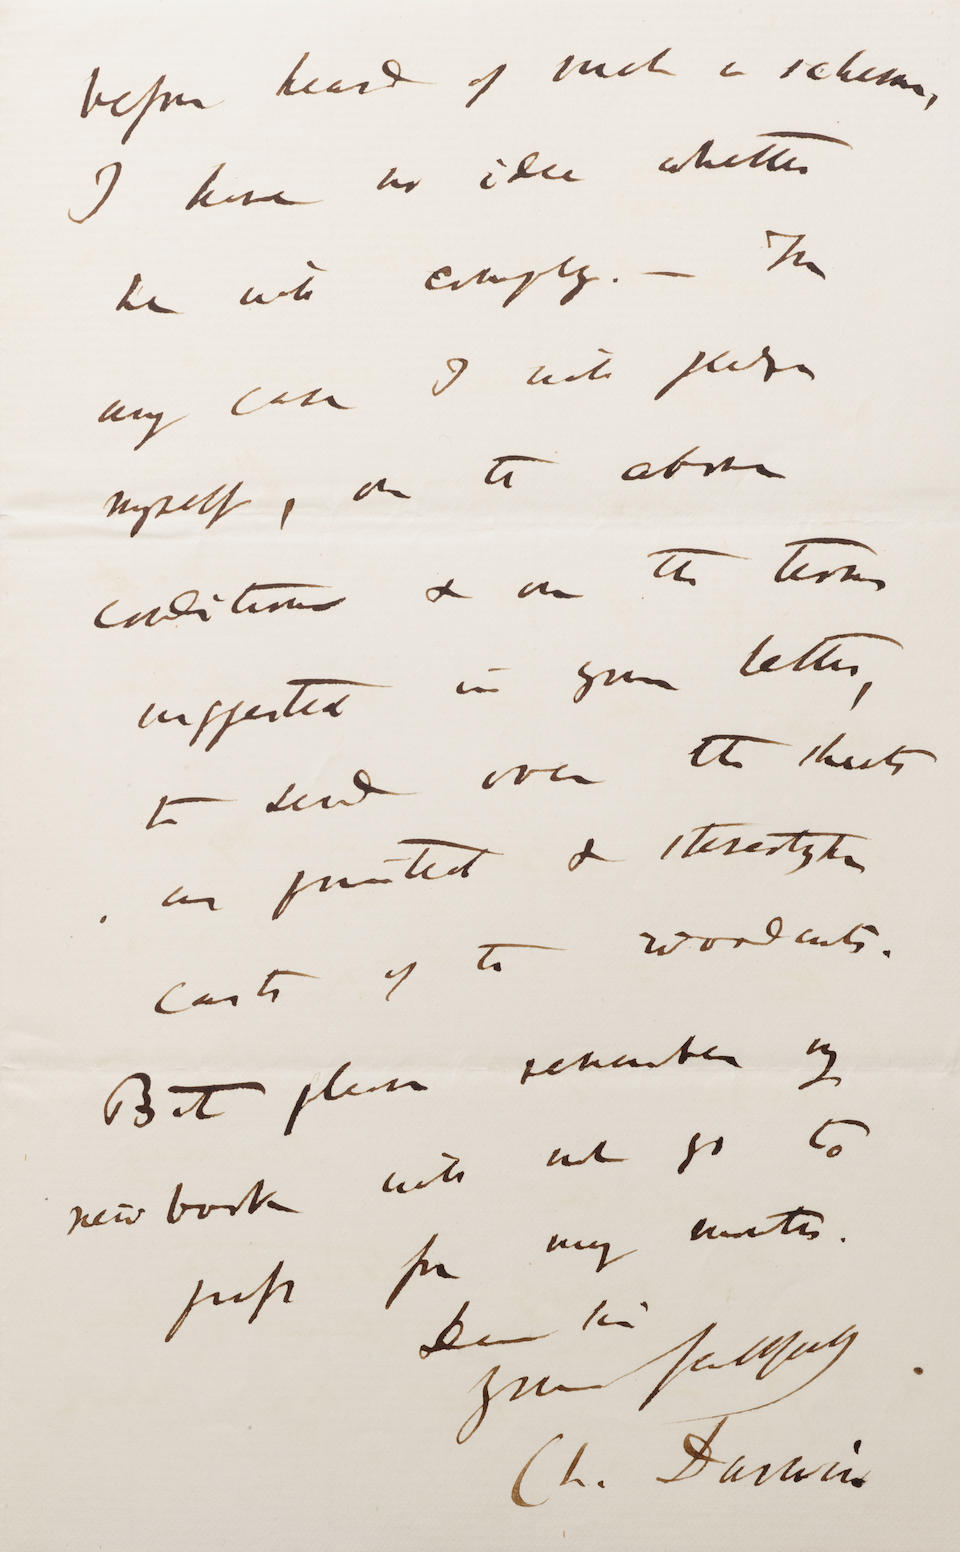 DARWIN, CHARLES. 1809-1882. Autograph Letter Signed ("Ch. Darwin") arranging for a new American edition of Origin of Species